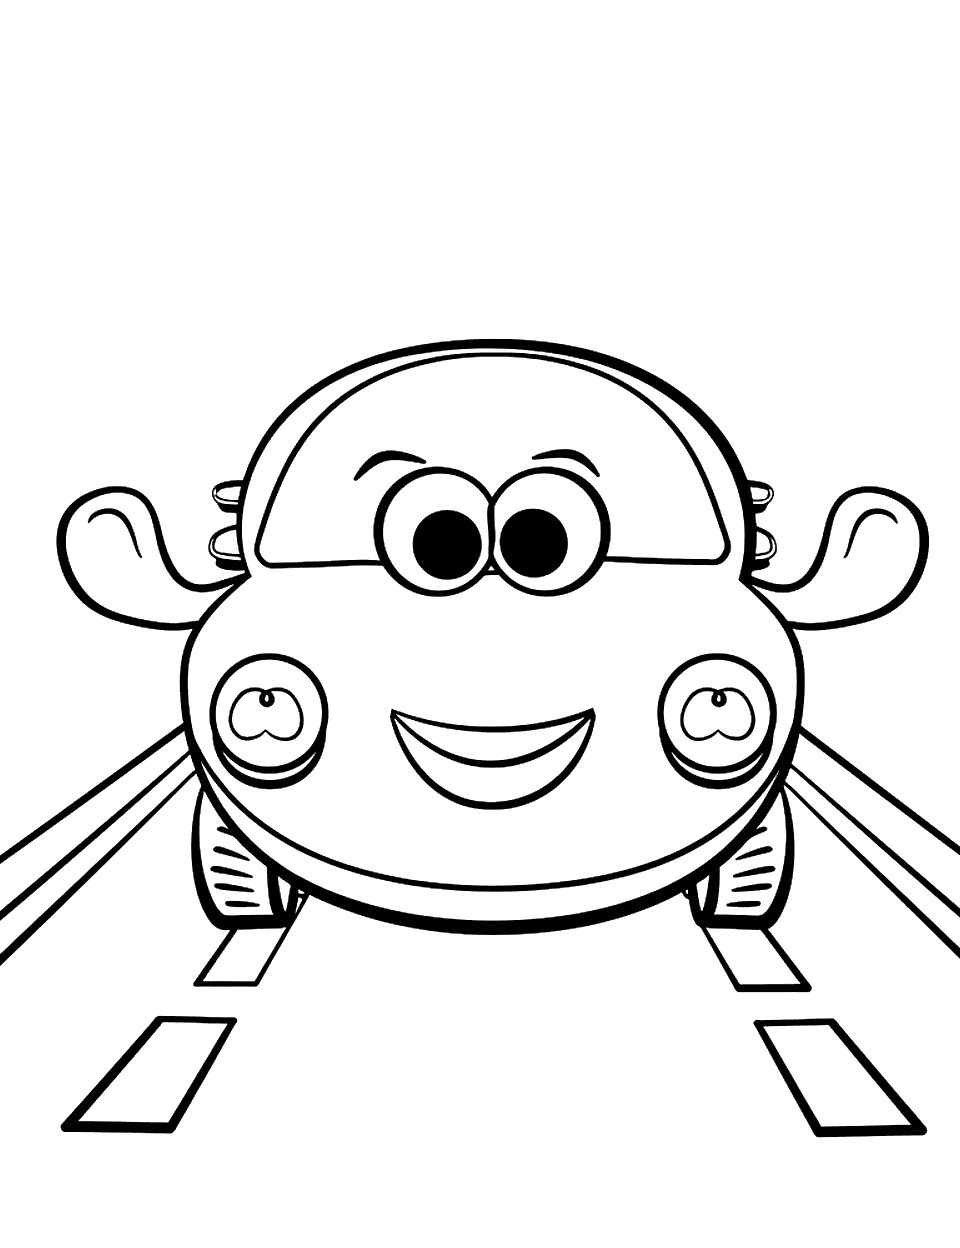 Car Racing Adventure Toddler Coloring Page - A cartoonish car with a big smile, racing down a straight road.